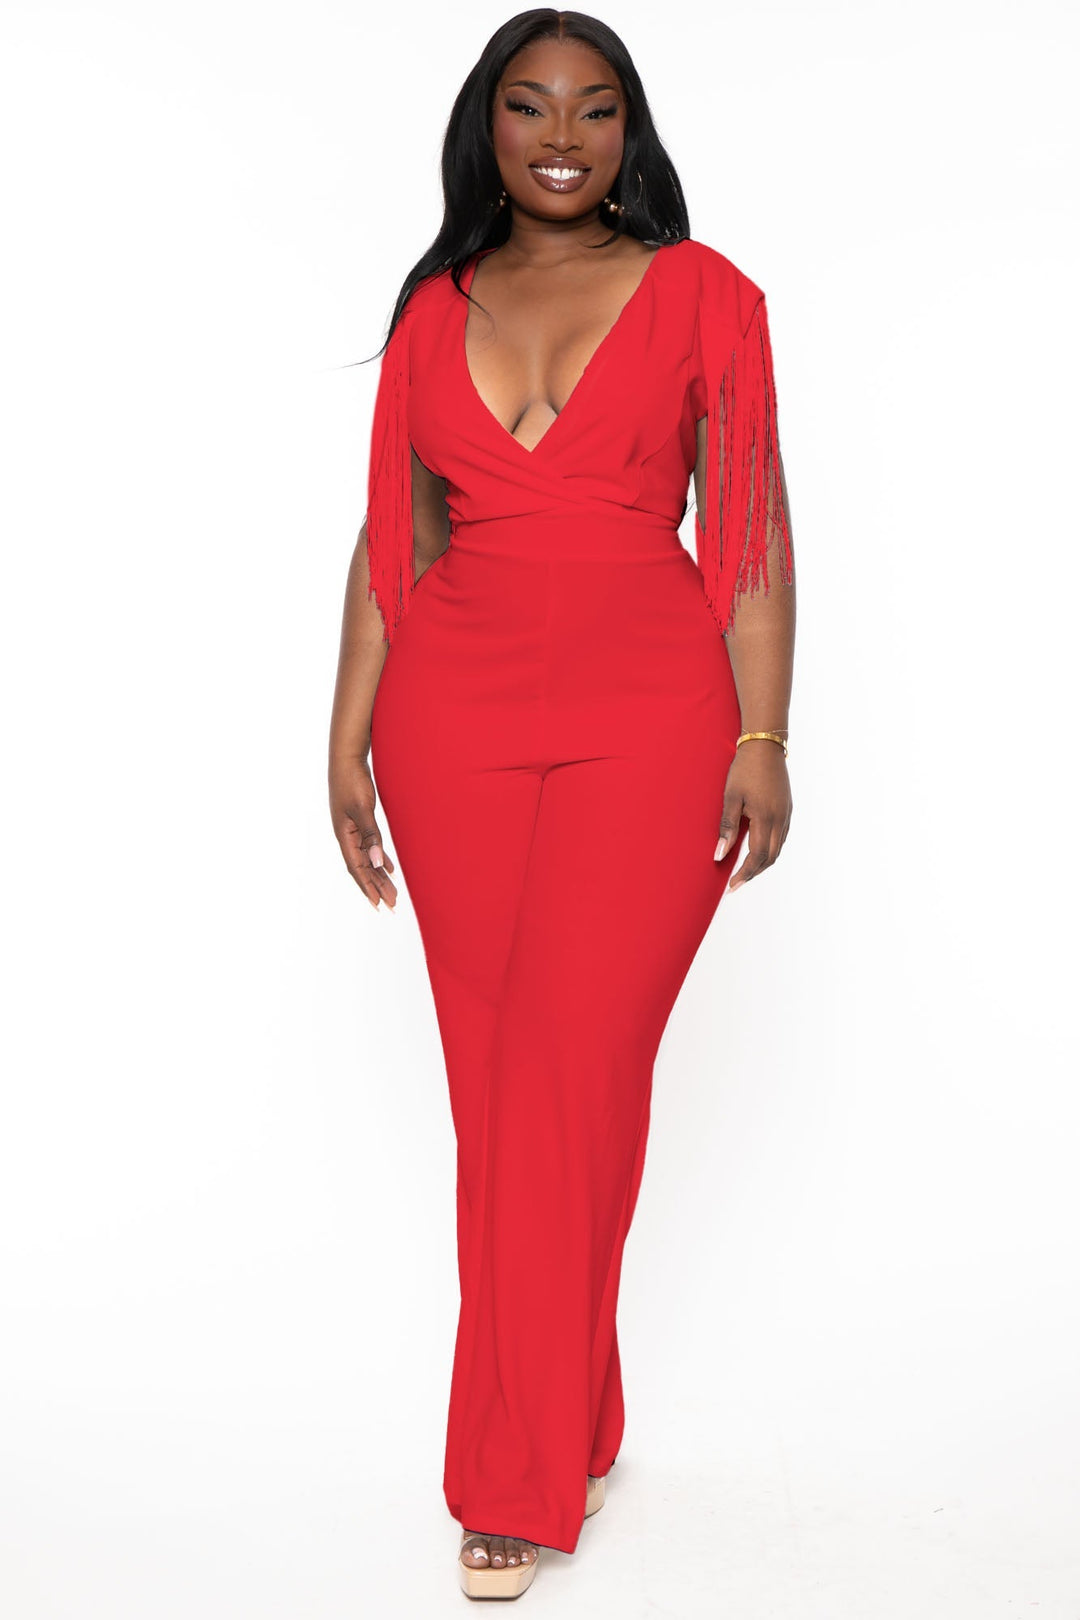 410 Plus Size Jumpsuits and Rompers ideas  plus size romper, plus size  jumpsuit, plus size